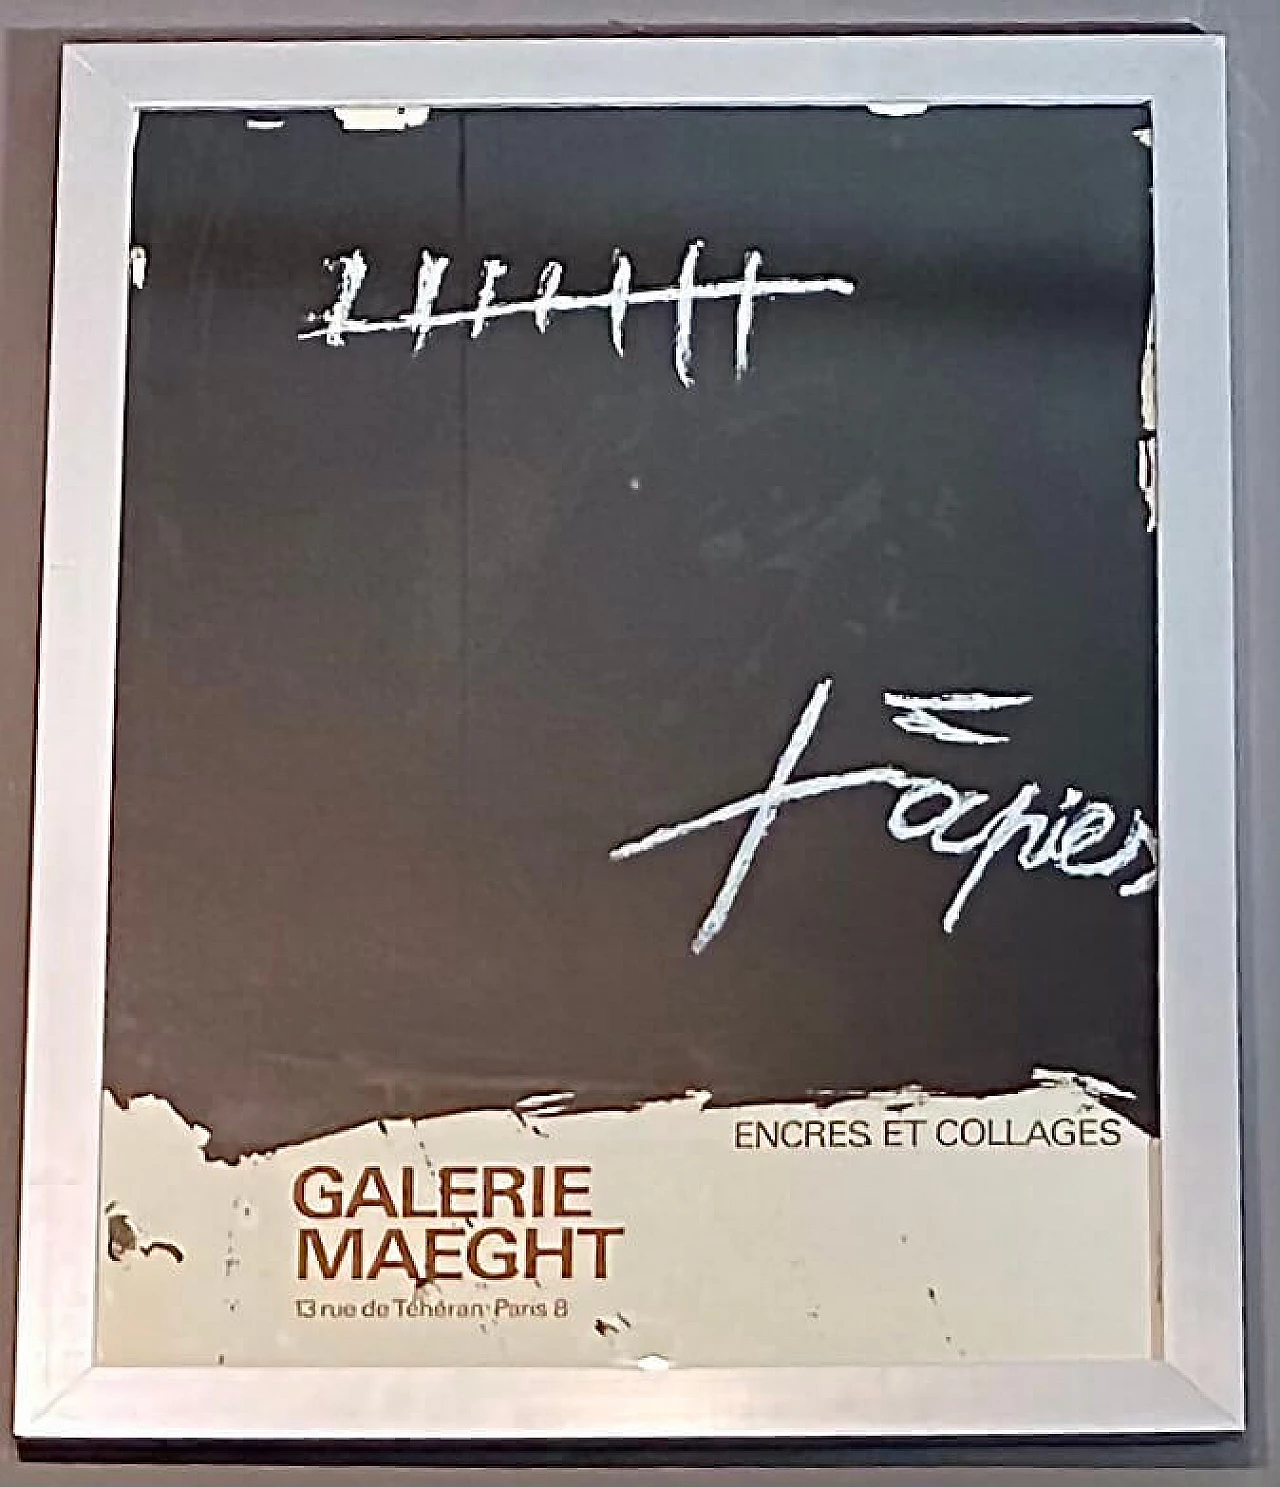 Antoni Tàpies, Encres et collages, lithography poster for exhibition at Galerie Maeght in Paris, 1968 1